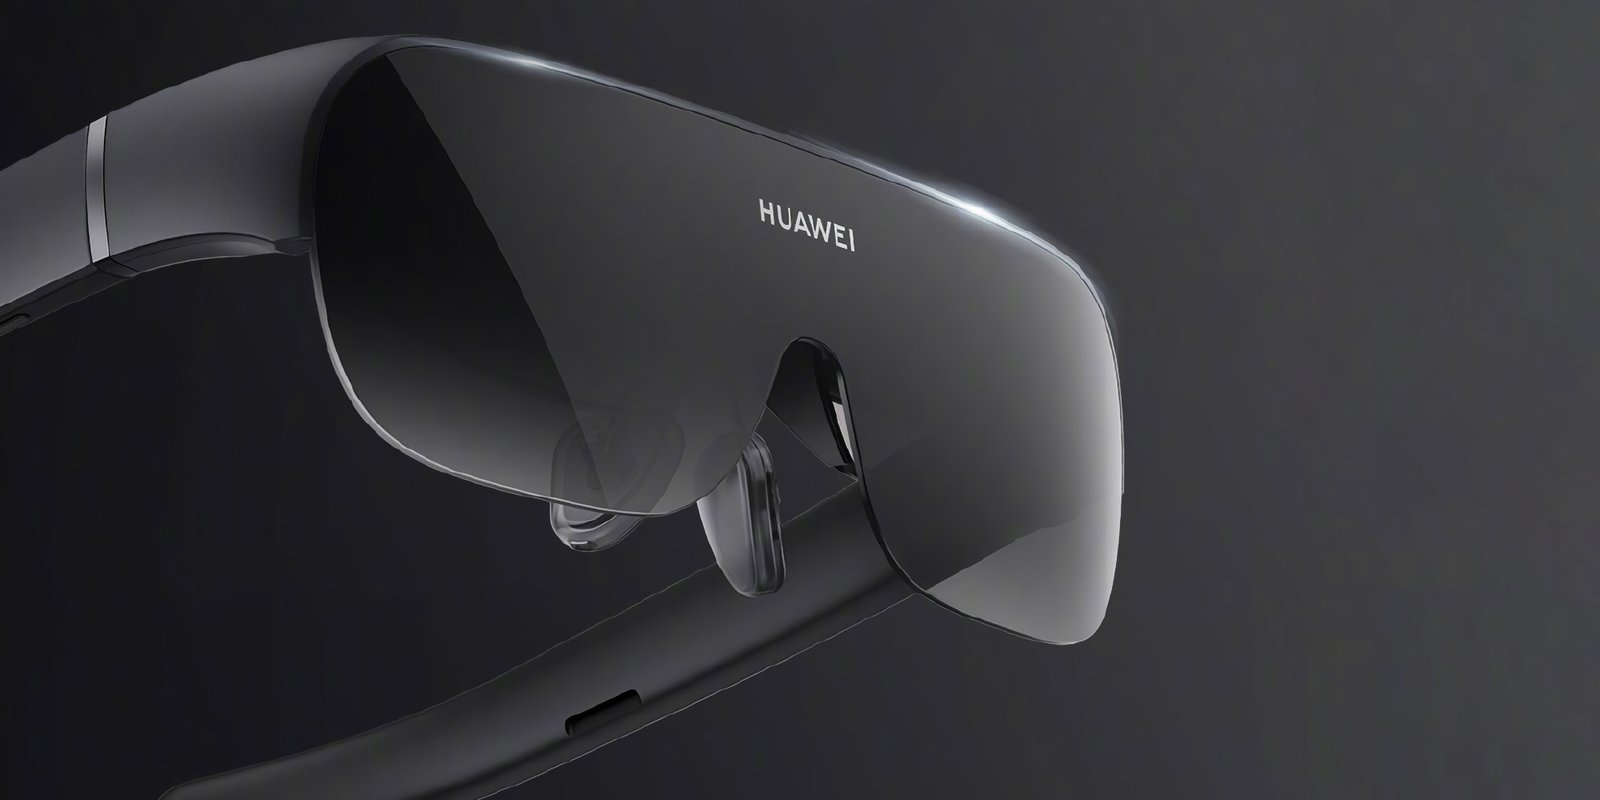 Huawei's Vision Expands: High-Tech Headset Boasts In-House Chip and 4K Micro-OLED Display